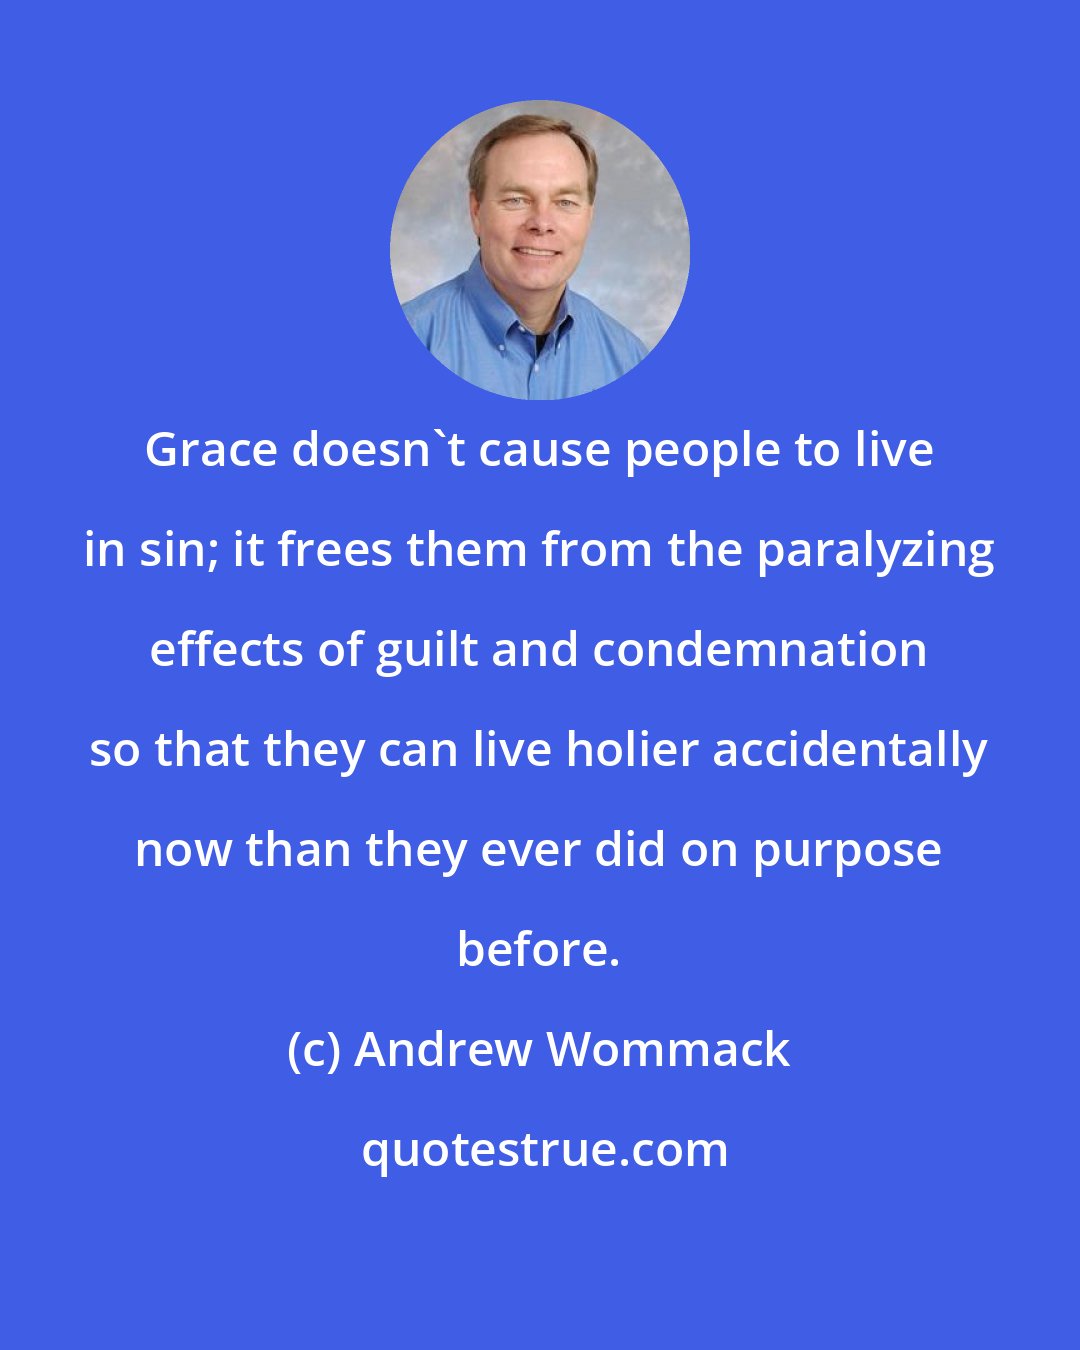 Andrew Wommack: Grace doesn't cause people to live in sin; it frees them from the paralyzing effects of guilt and condemnation so that they can live holier accidentally now than they ever did on purpose before.